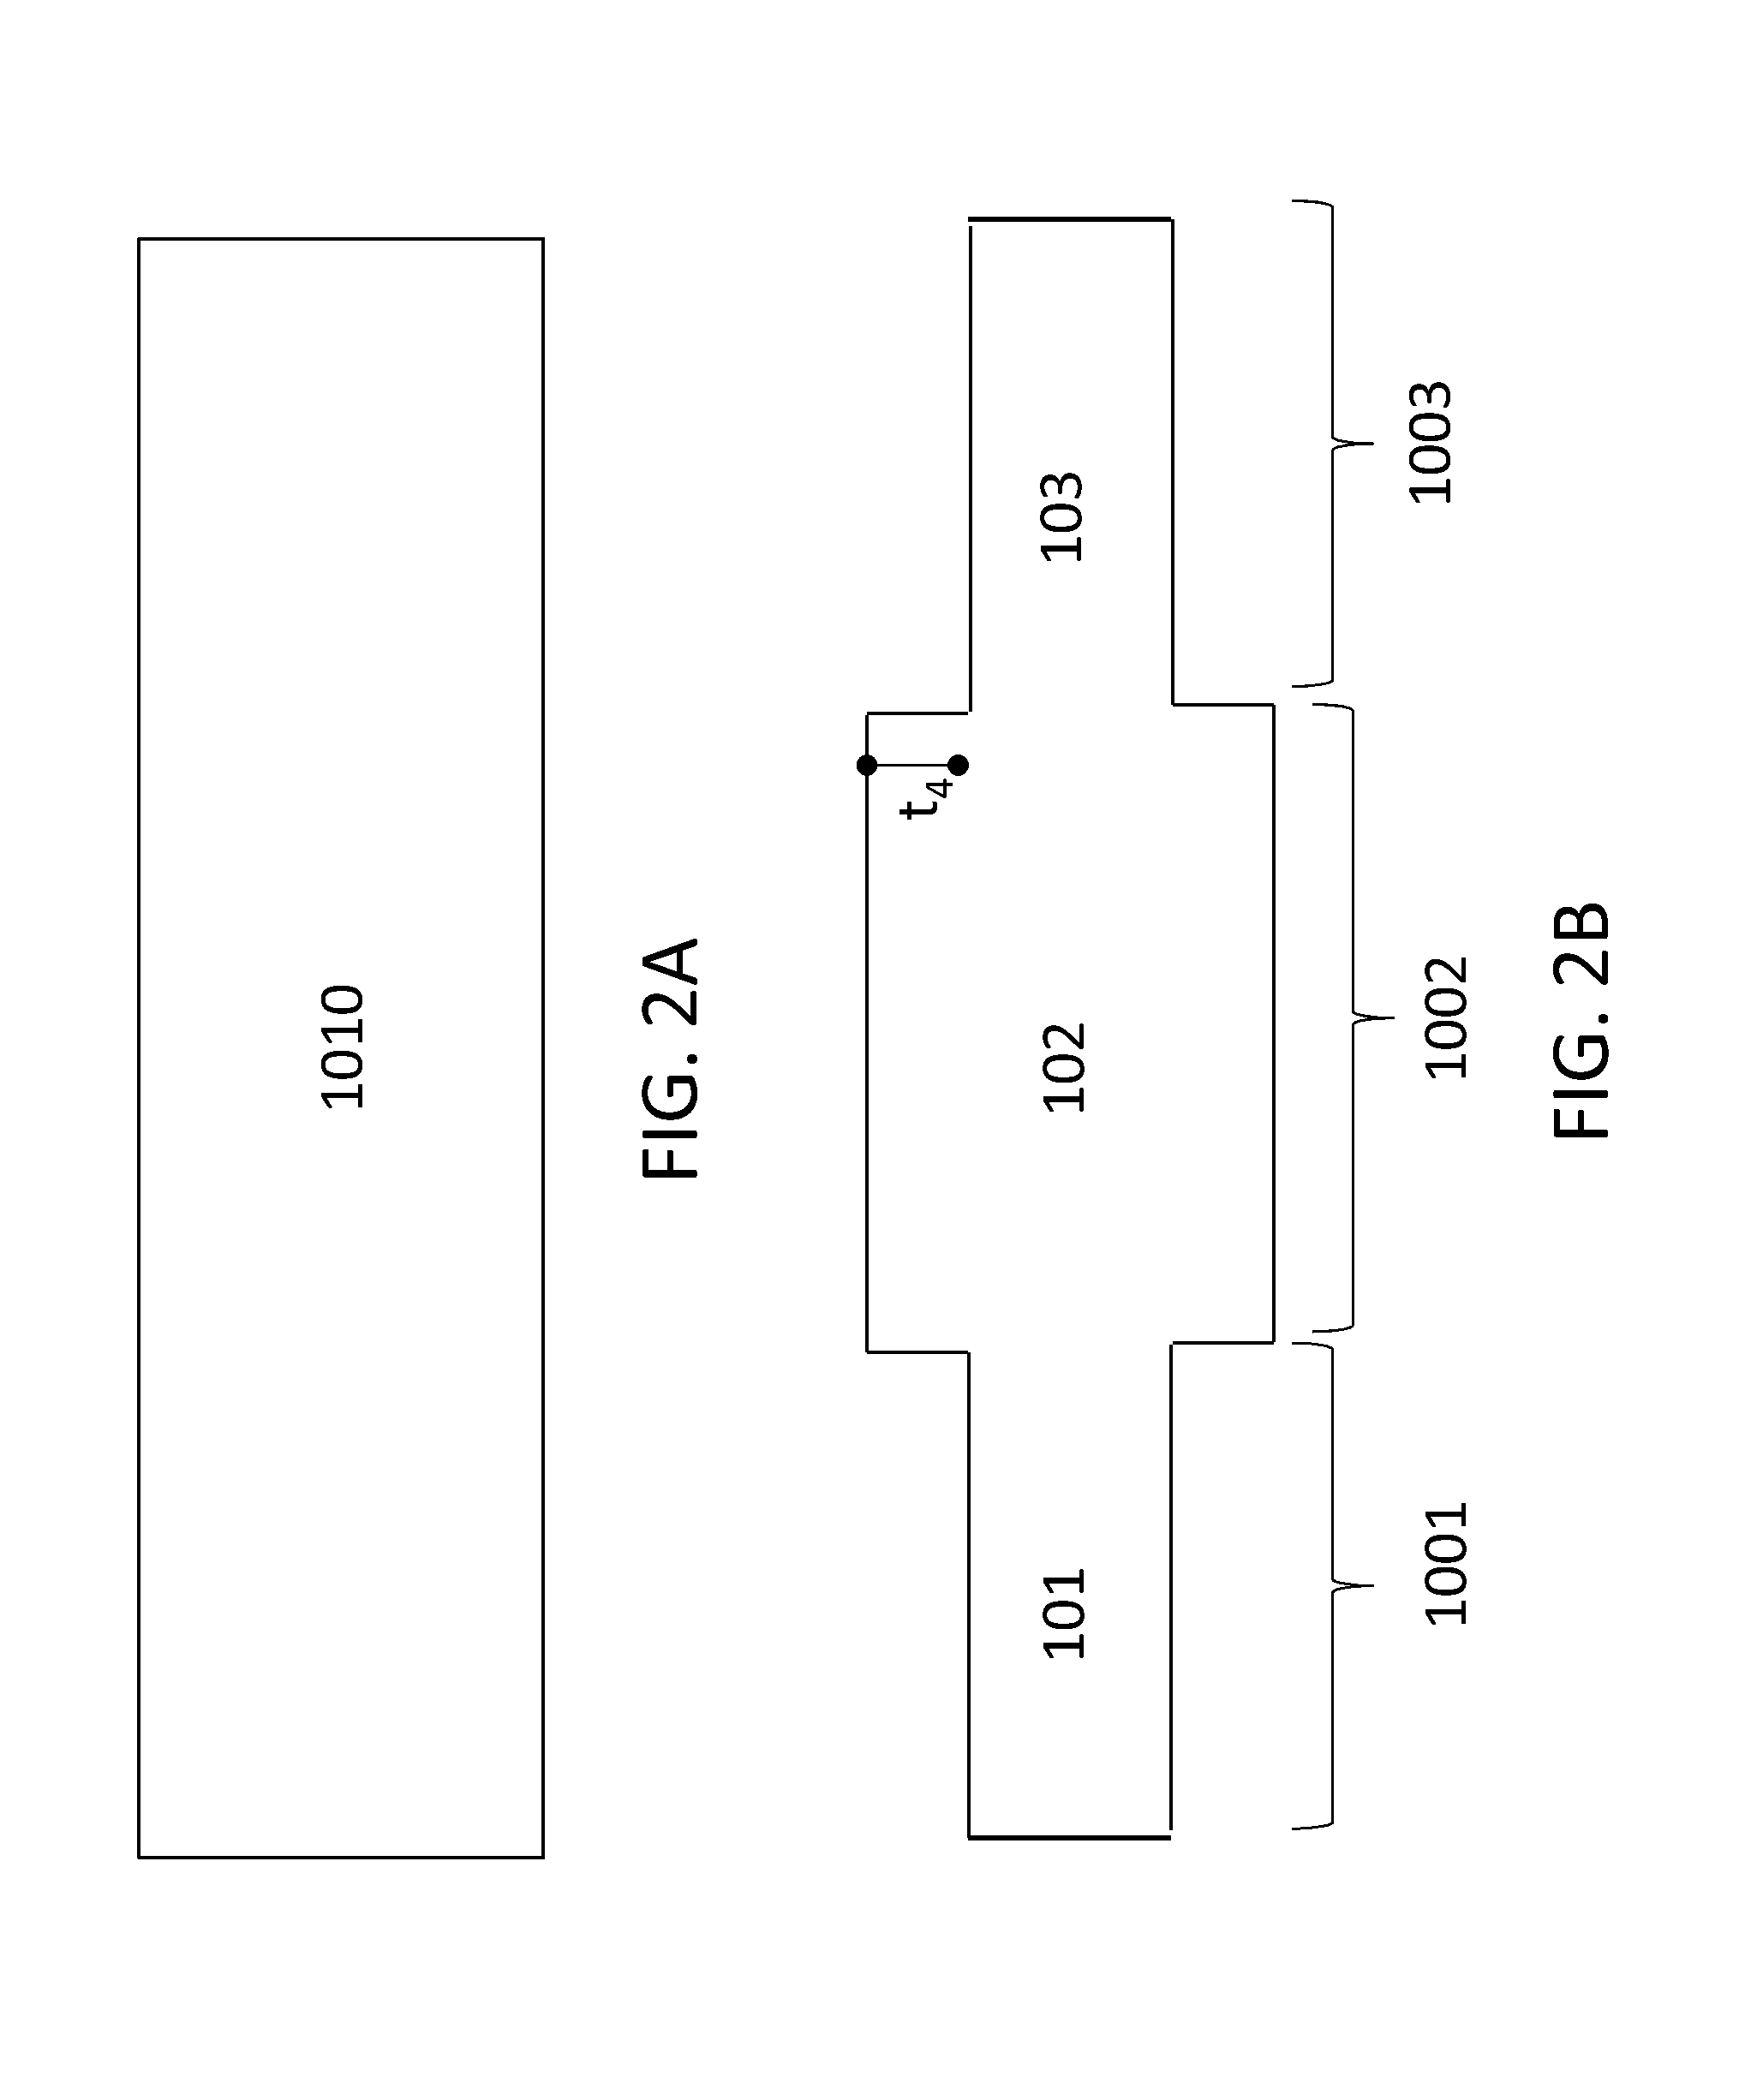 Semiconductor heterostructure field effect transistor and method for making thereof